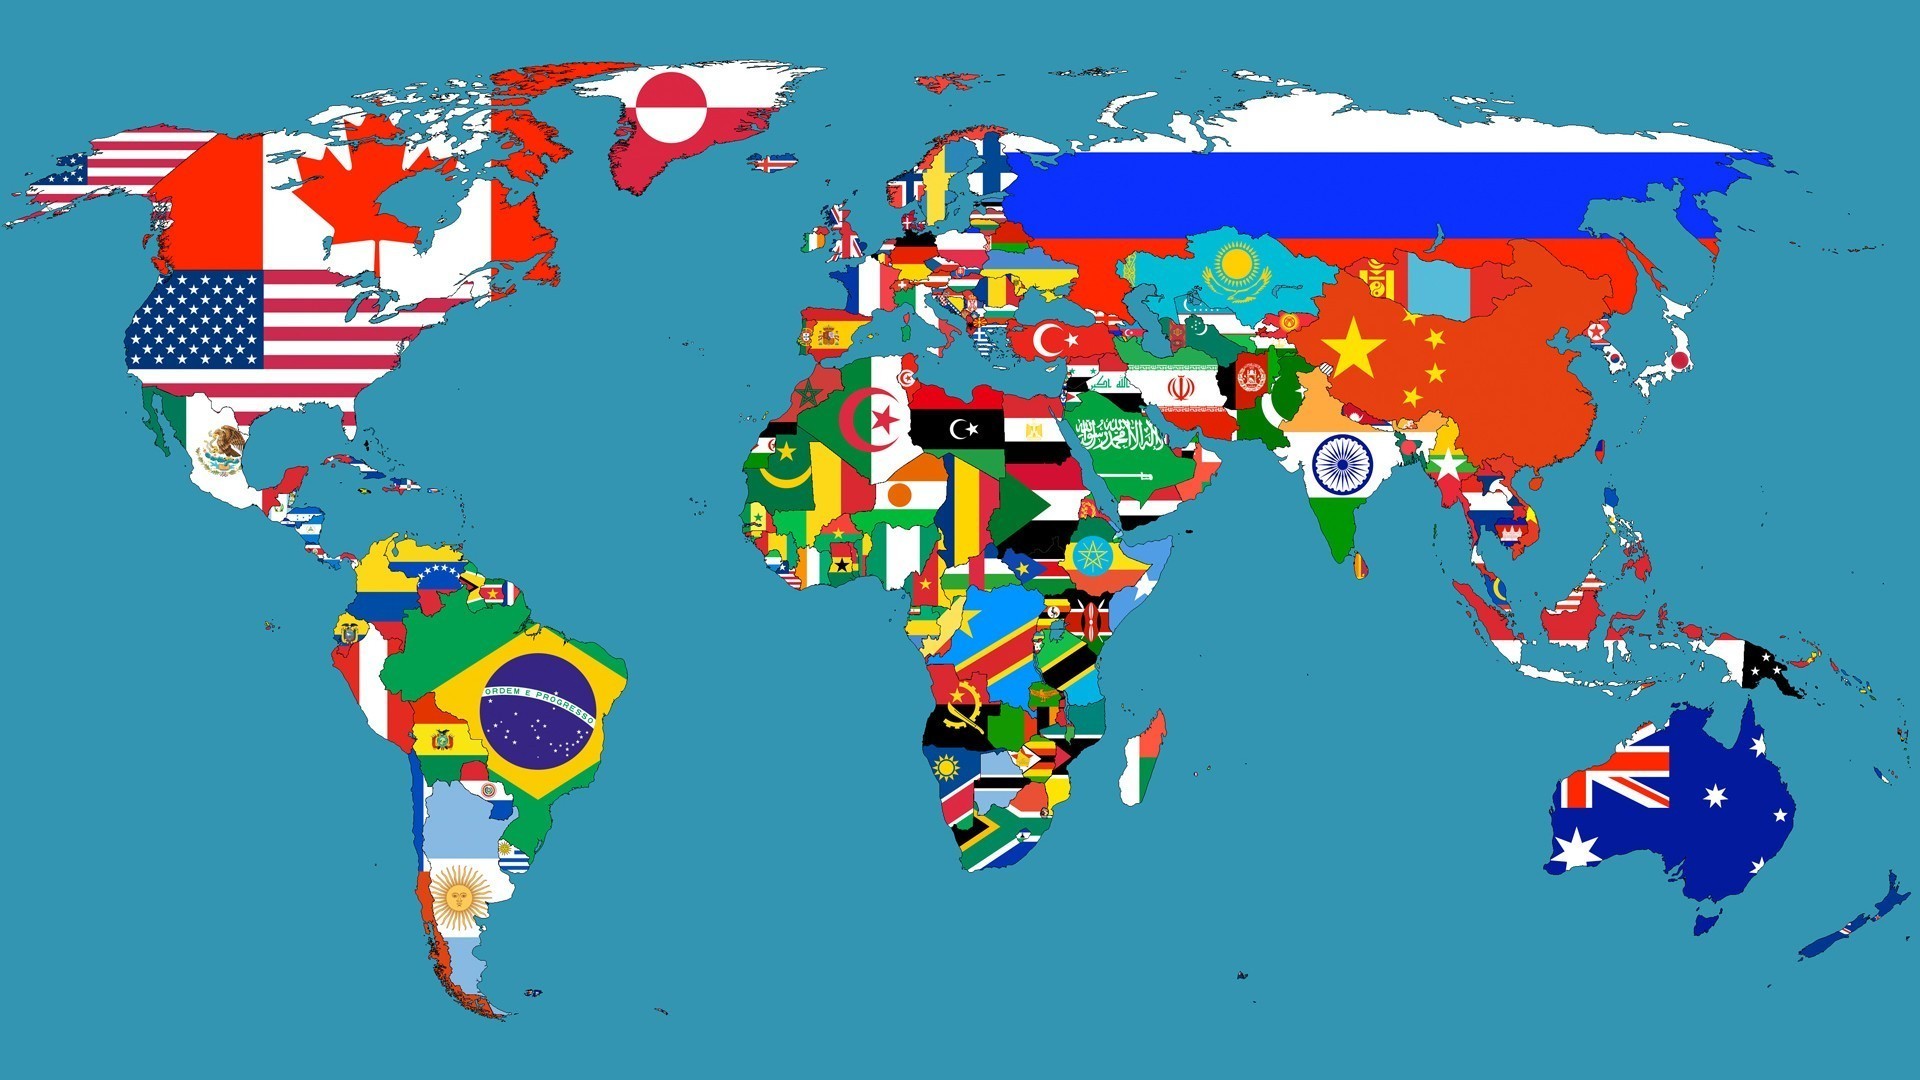 1920x1080 World Map Wallpaper With Countries